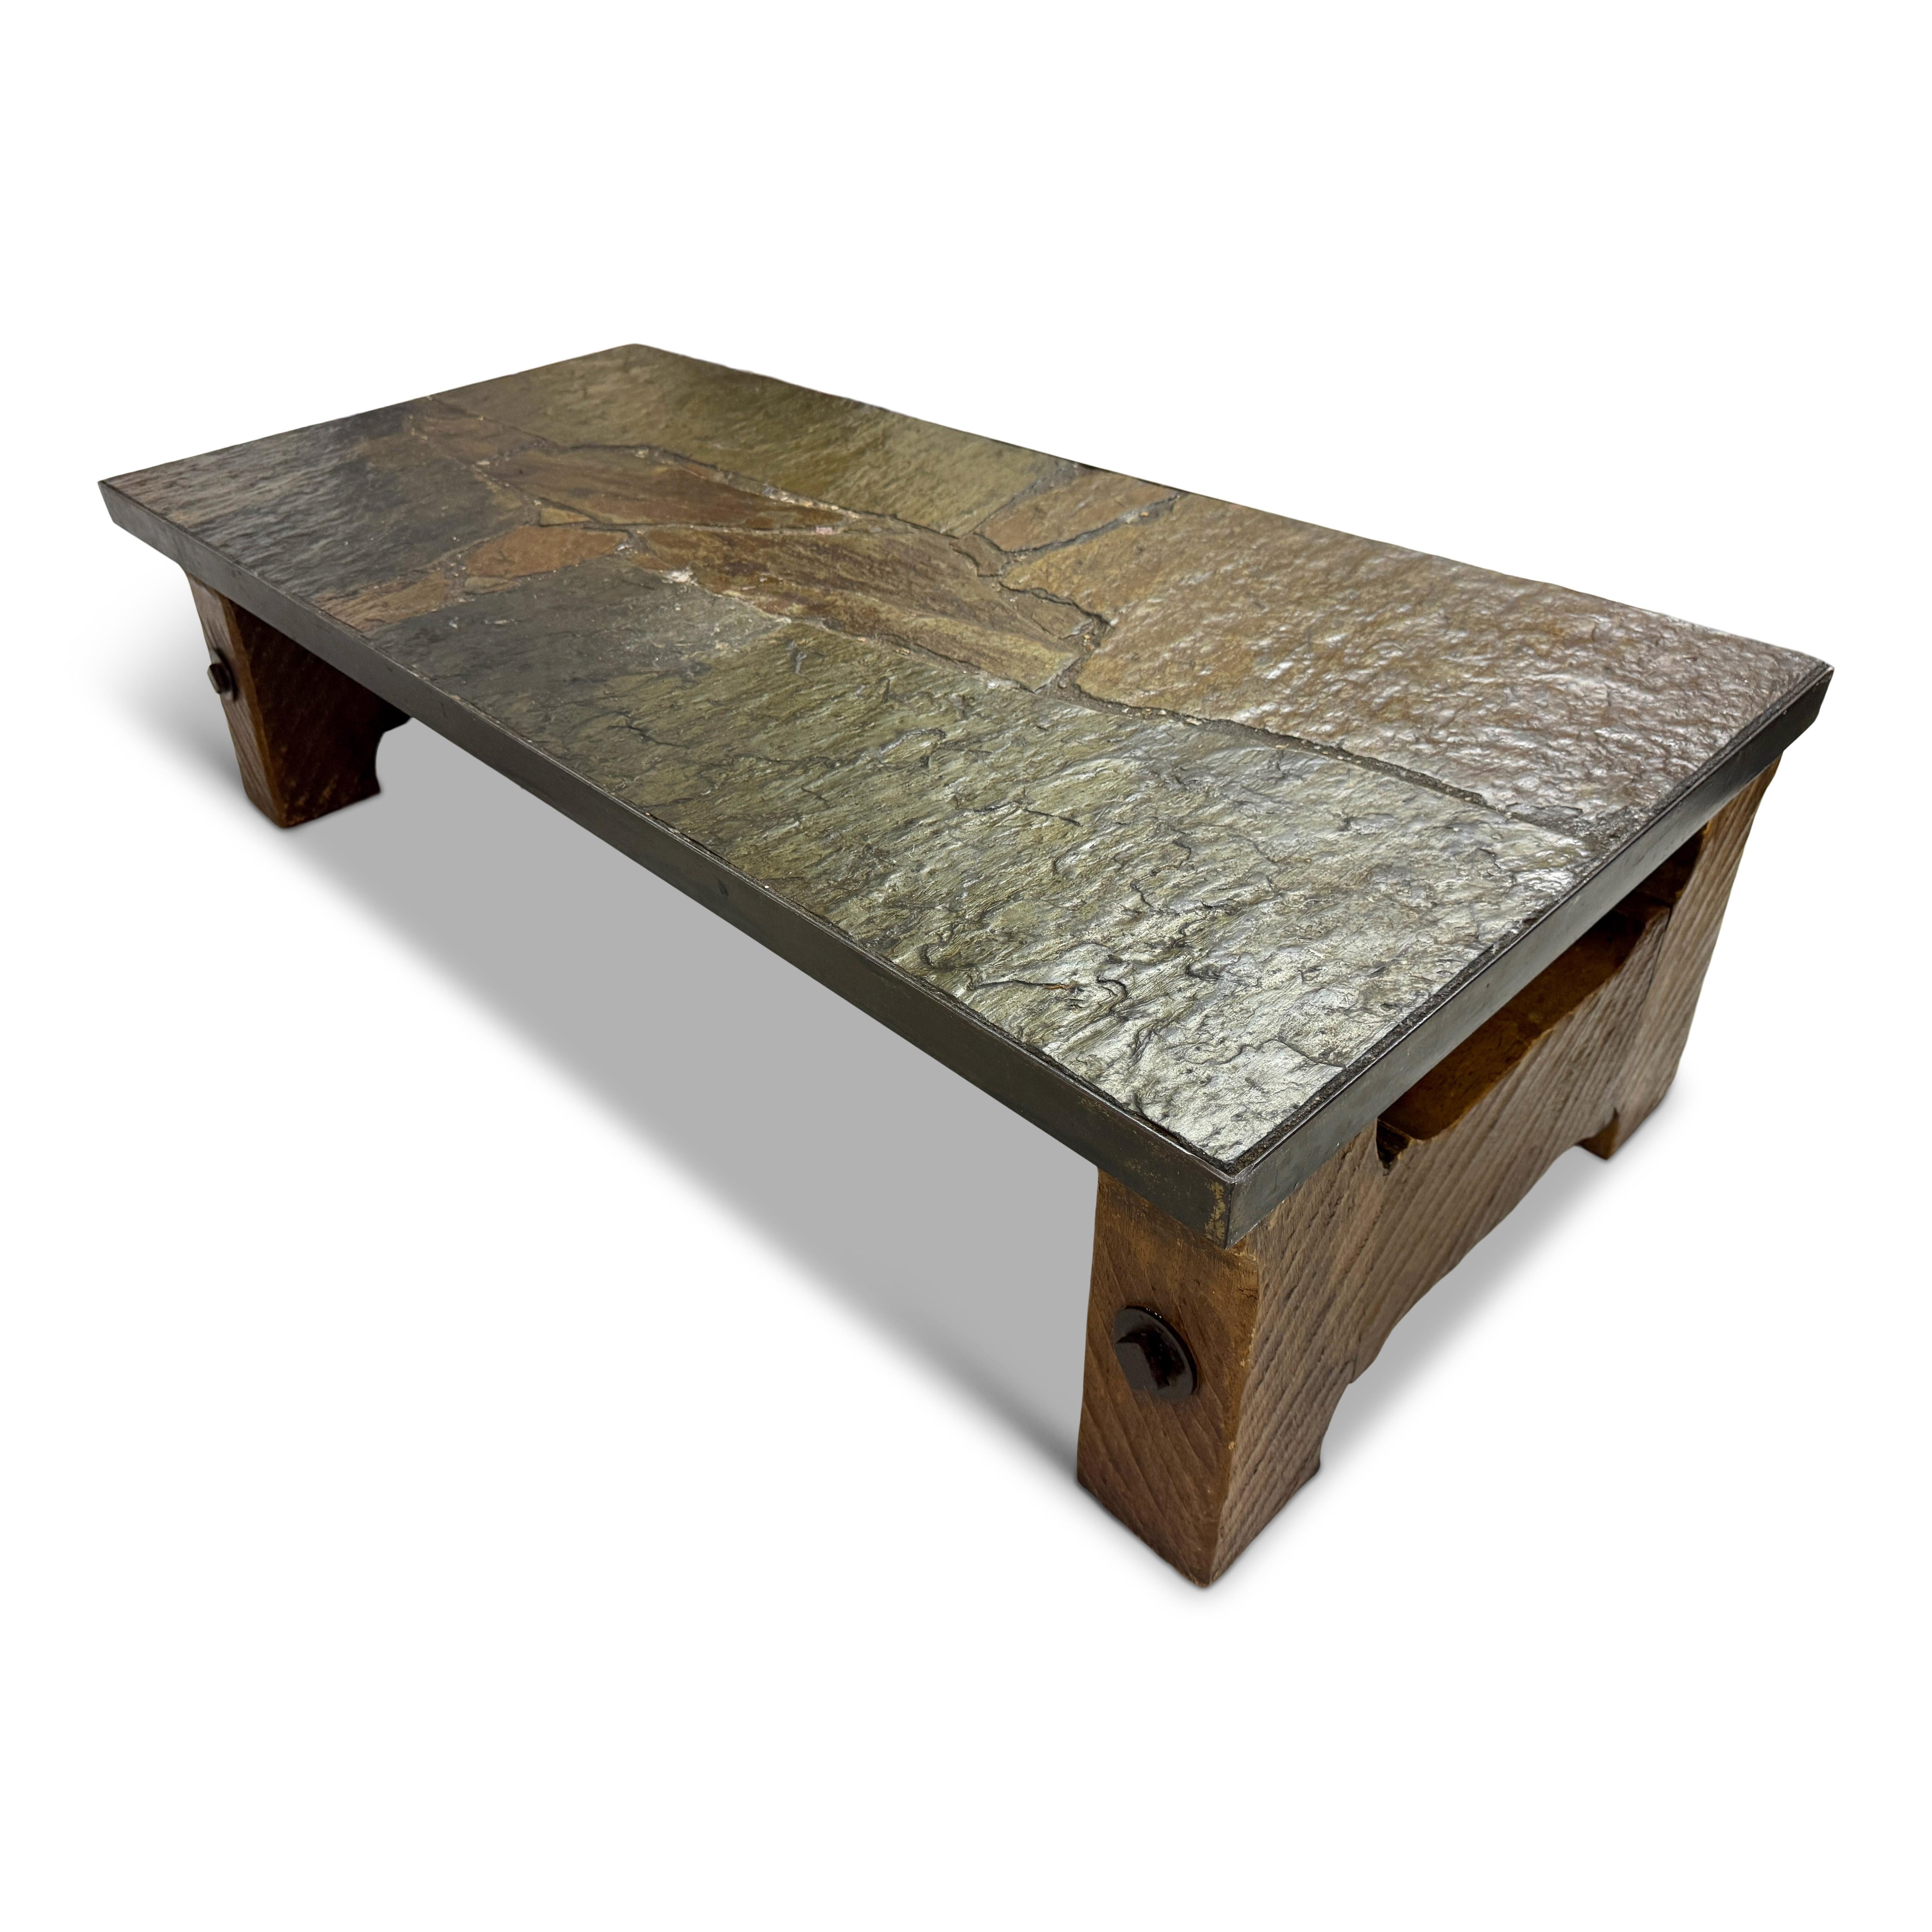 Coffee table

Brutalist

Slate and stone on concrete top 

Oak and iron base

Belgian 1960s/1970s
